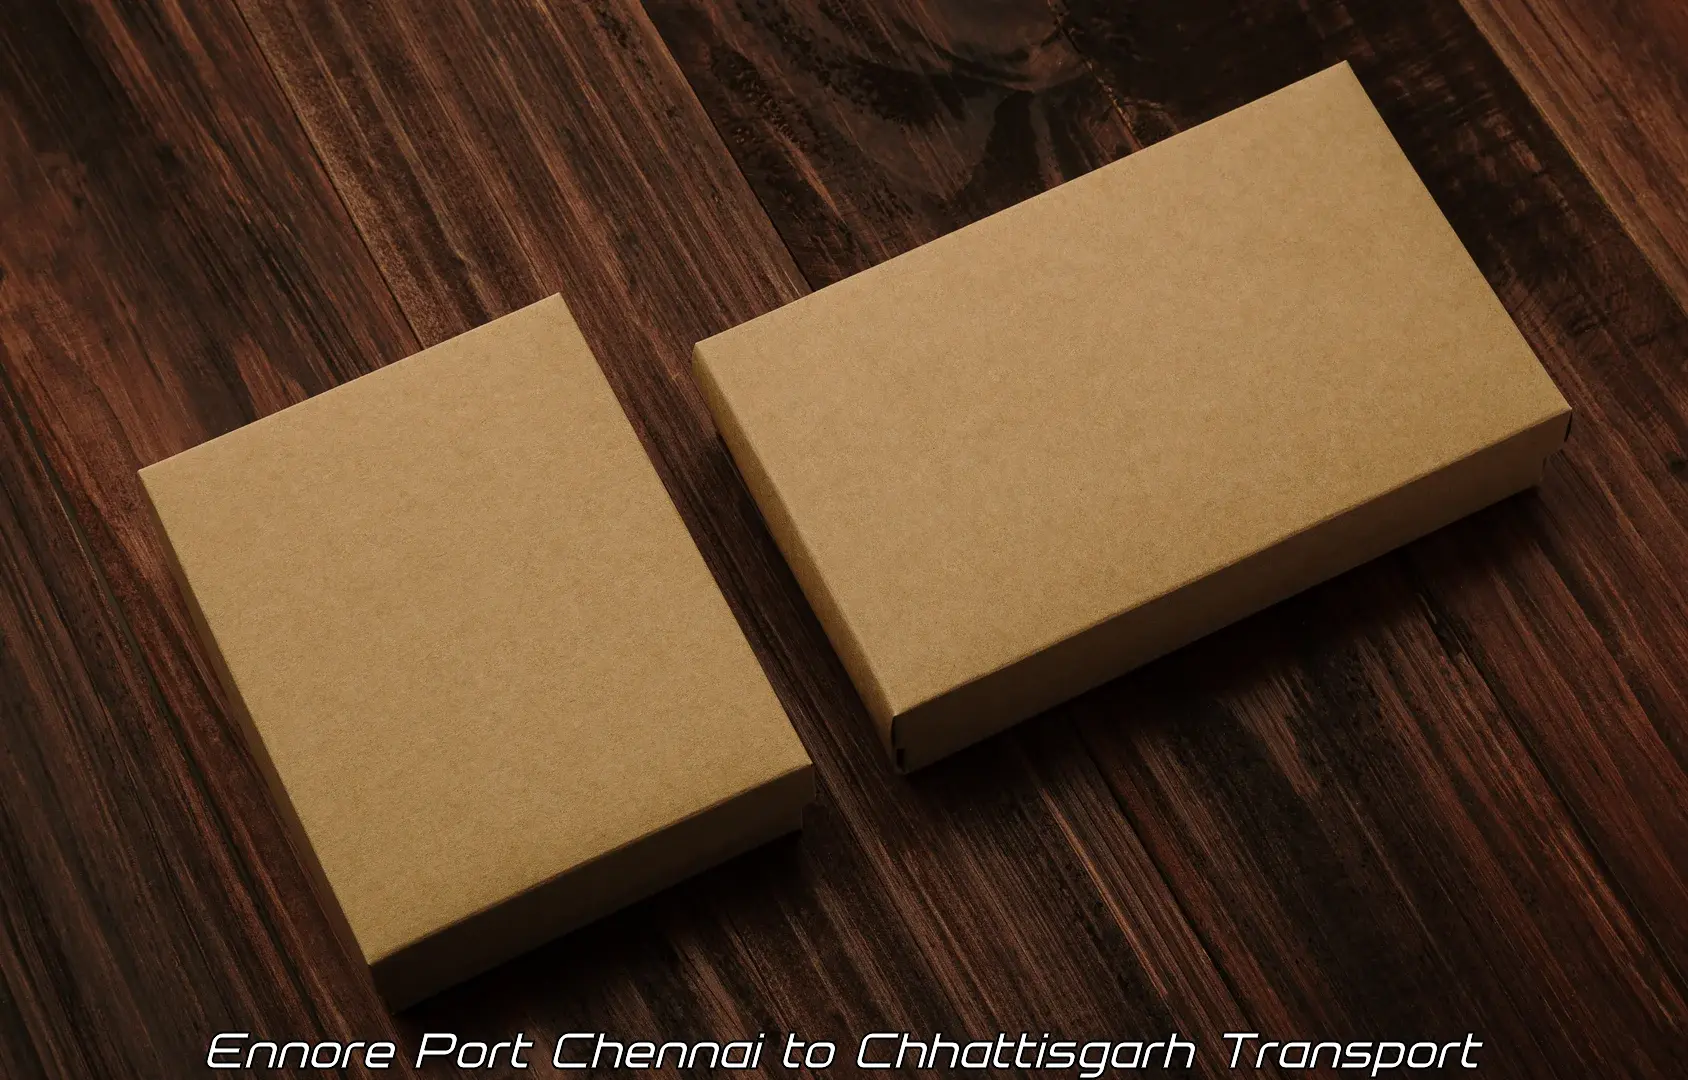 Daily transport service Ennore Port Chennai to Basna